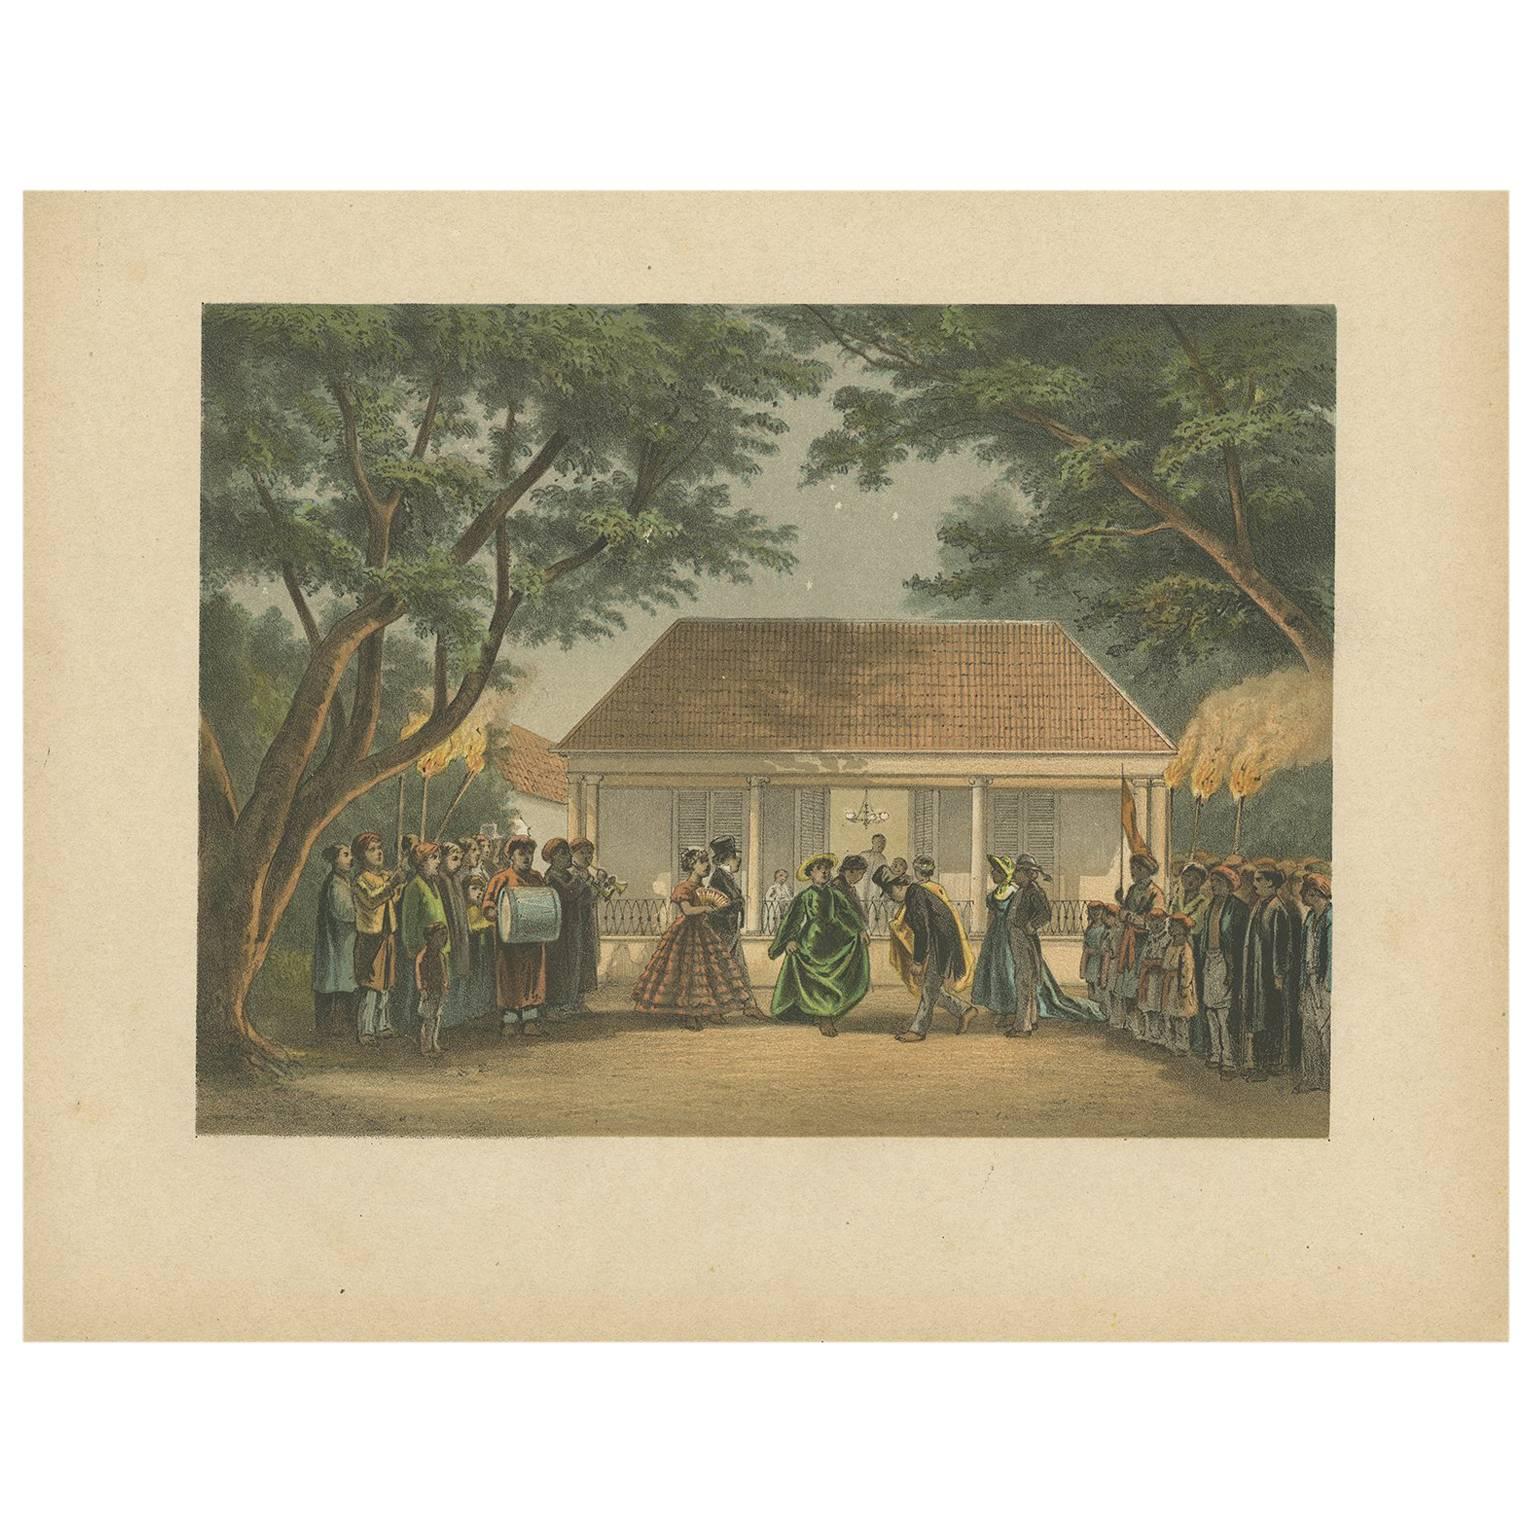 Antique Print of a Party in Batavia by M.T.H. Perelaer, 1888